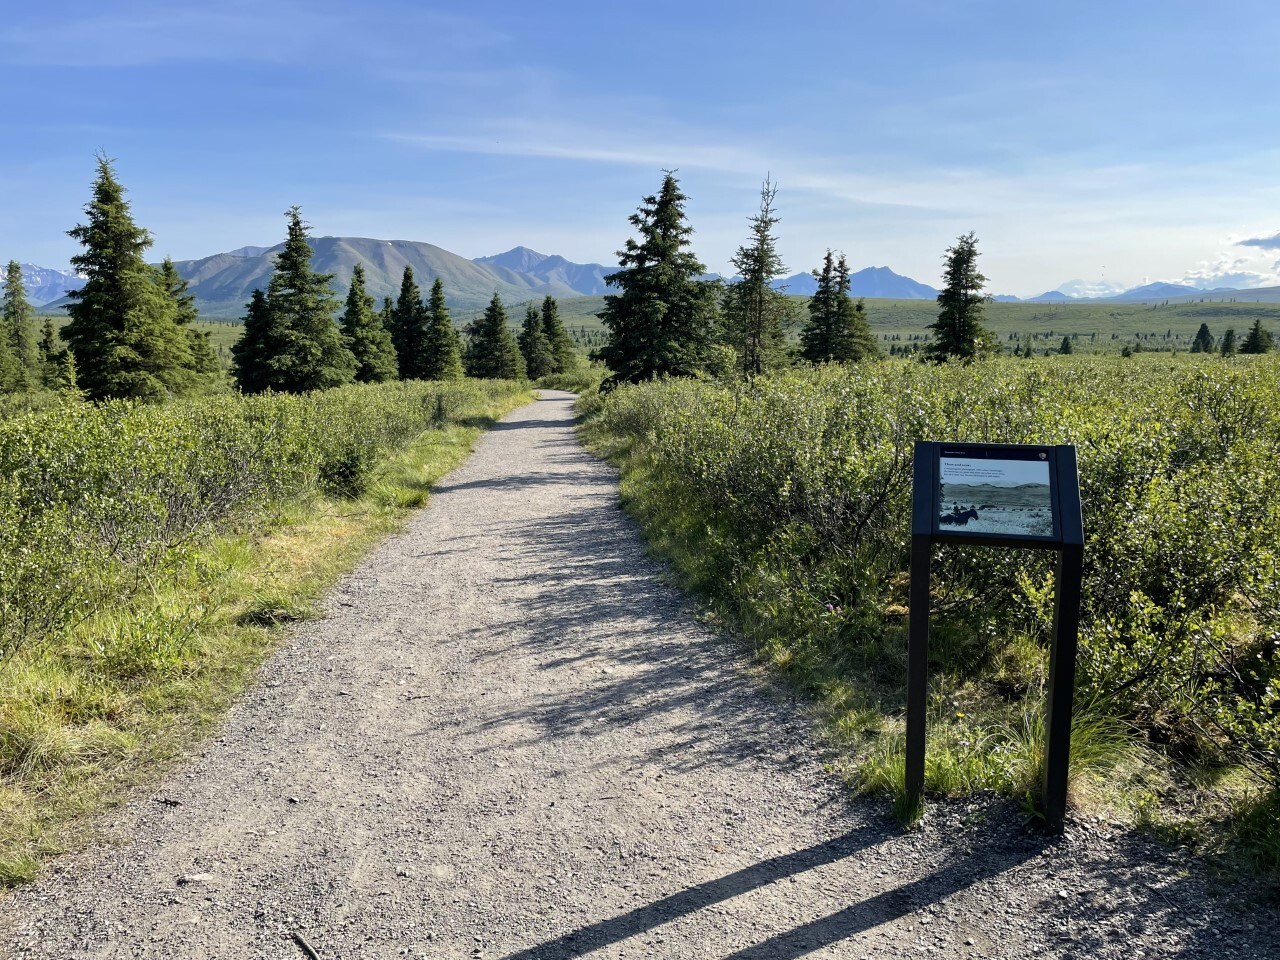 A gravel path leads through green brush and scattered spruce trees, against a backdrop of distant mountains and a clear blue sky. A small sign with an image and text is posted on the side of the trail.